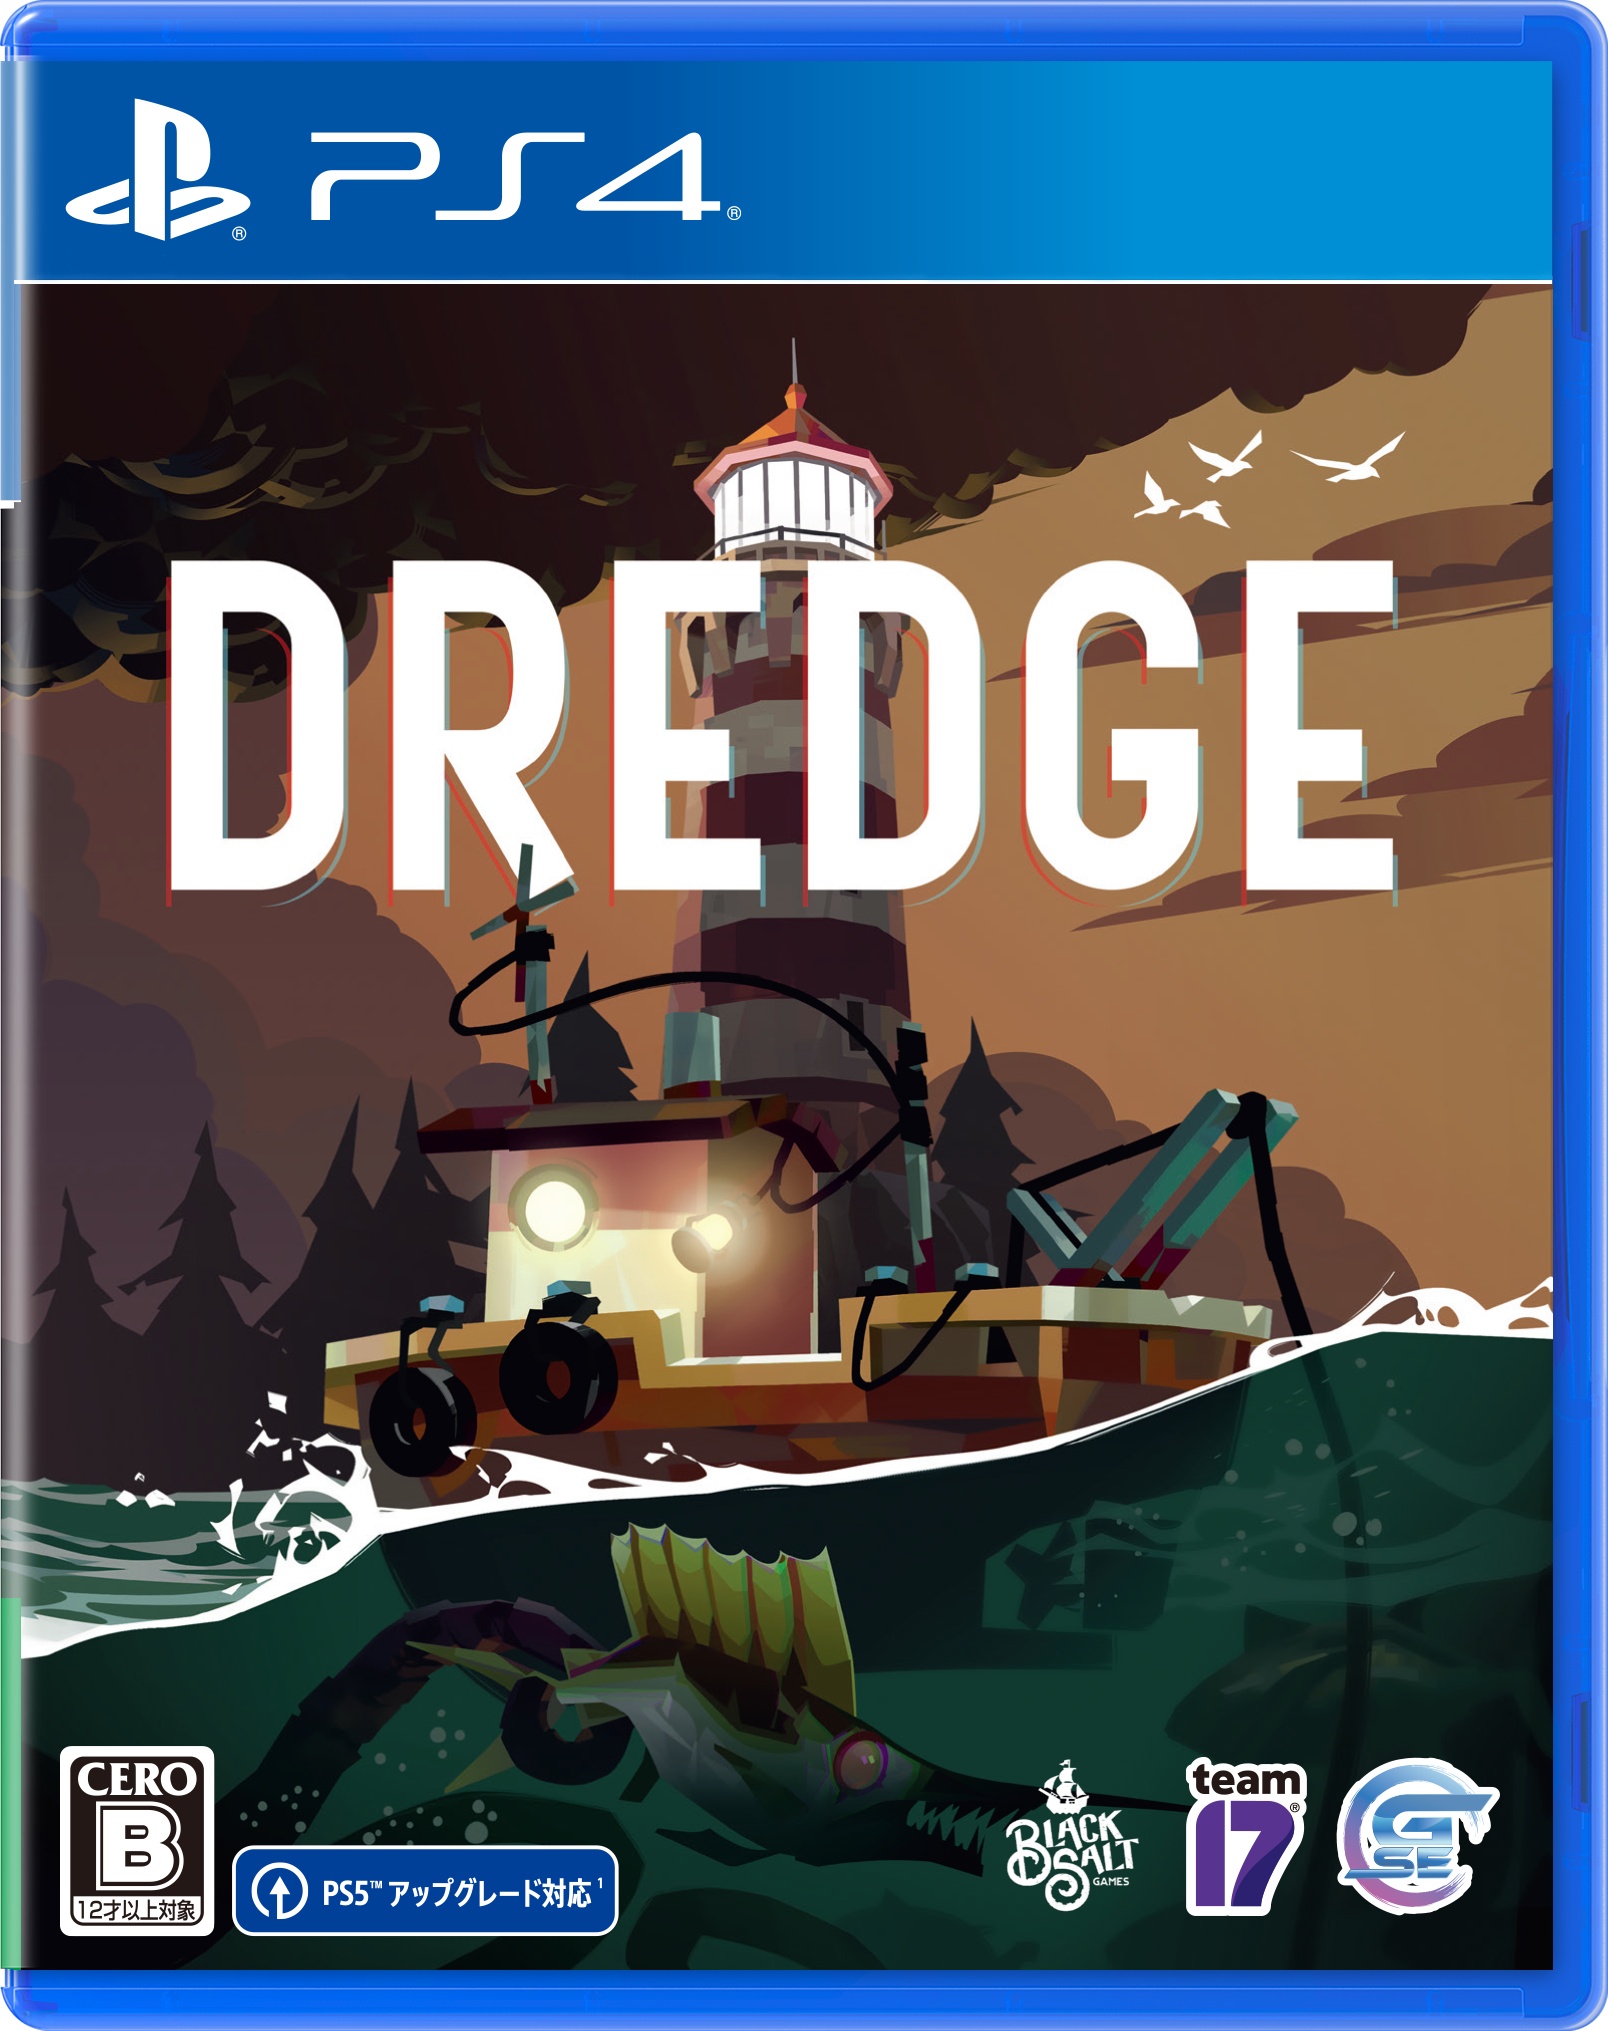 Fishing adventure game DREDGE is officially released today! Pick